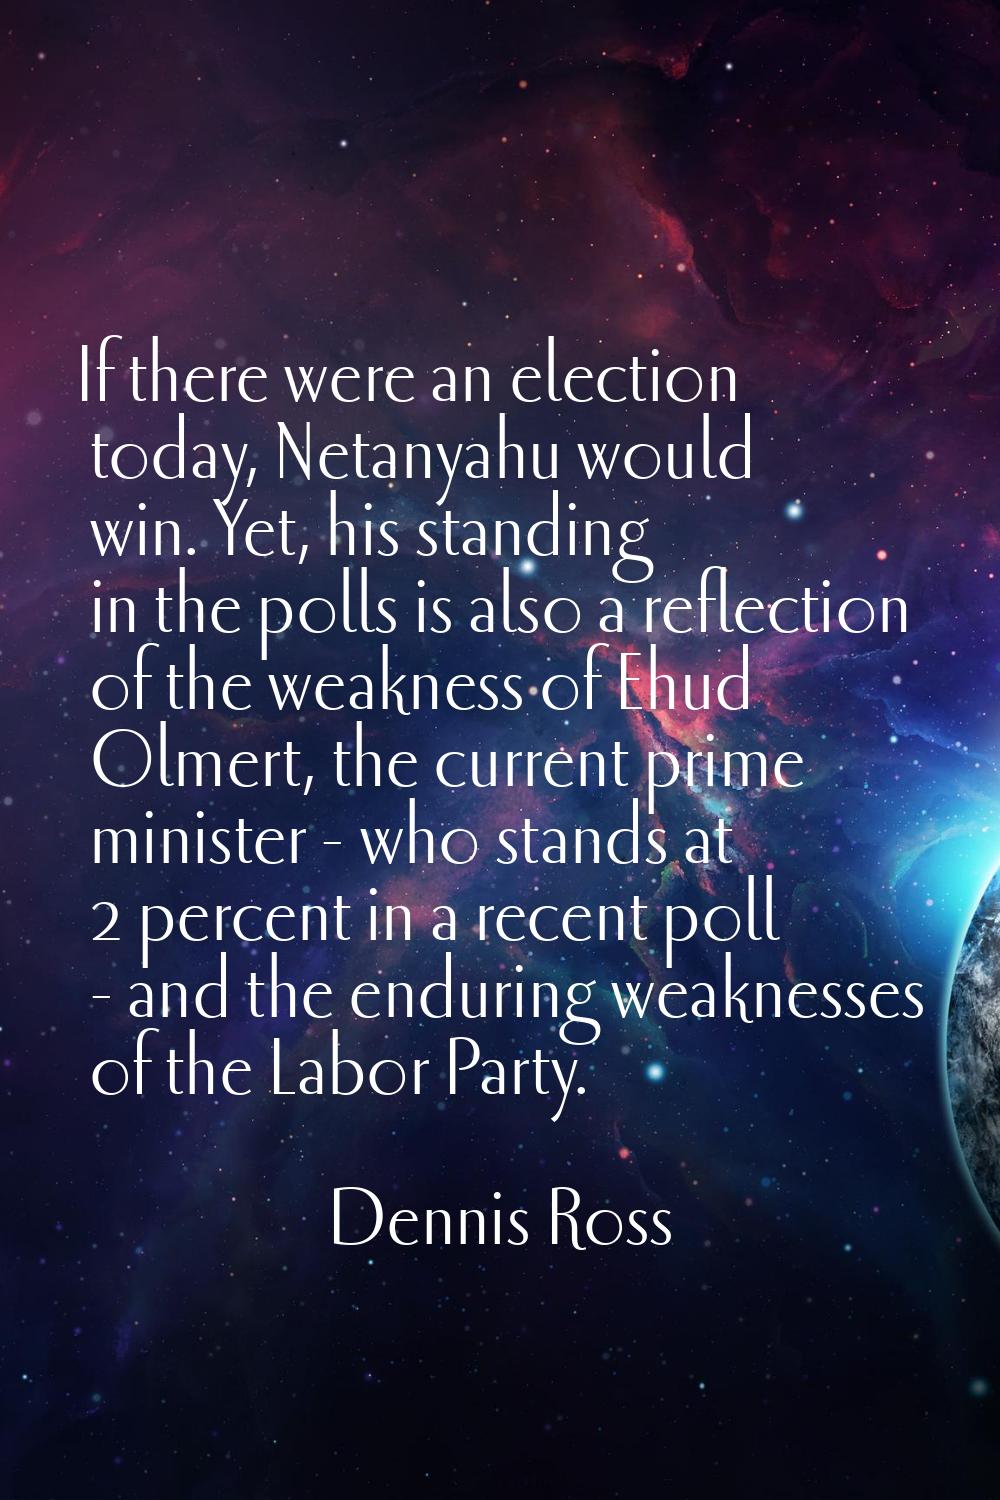 If there were an election today, Netanyahu would win. Yet, his standing in the polls is also a refl